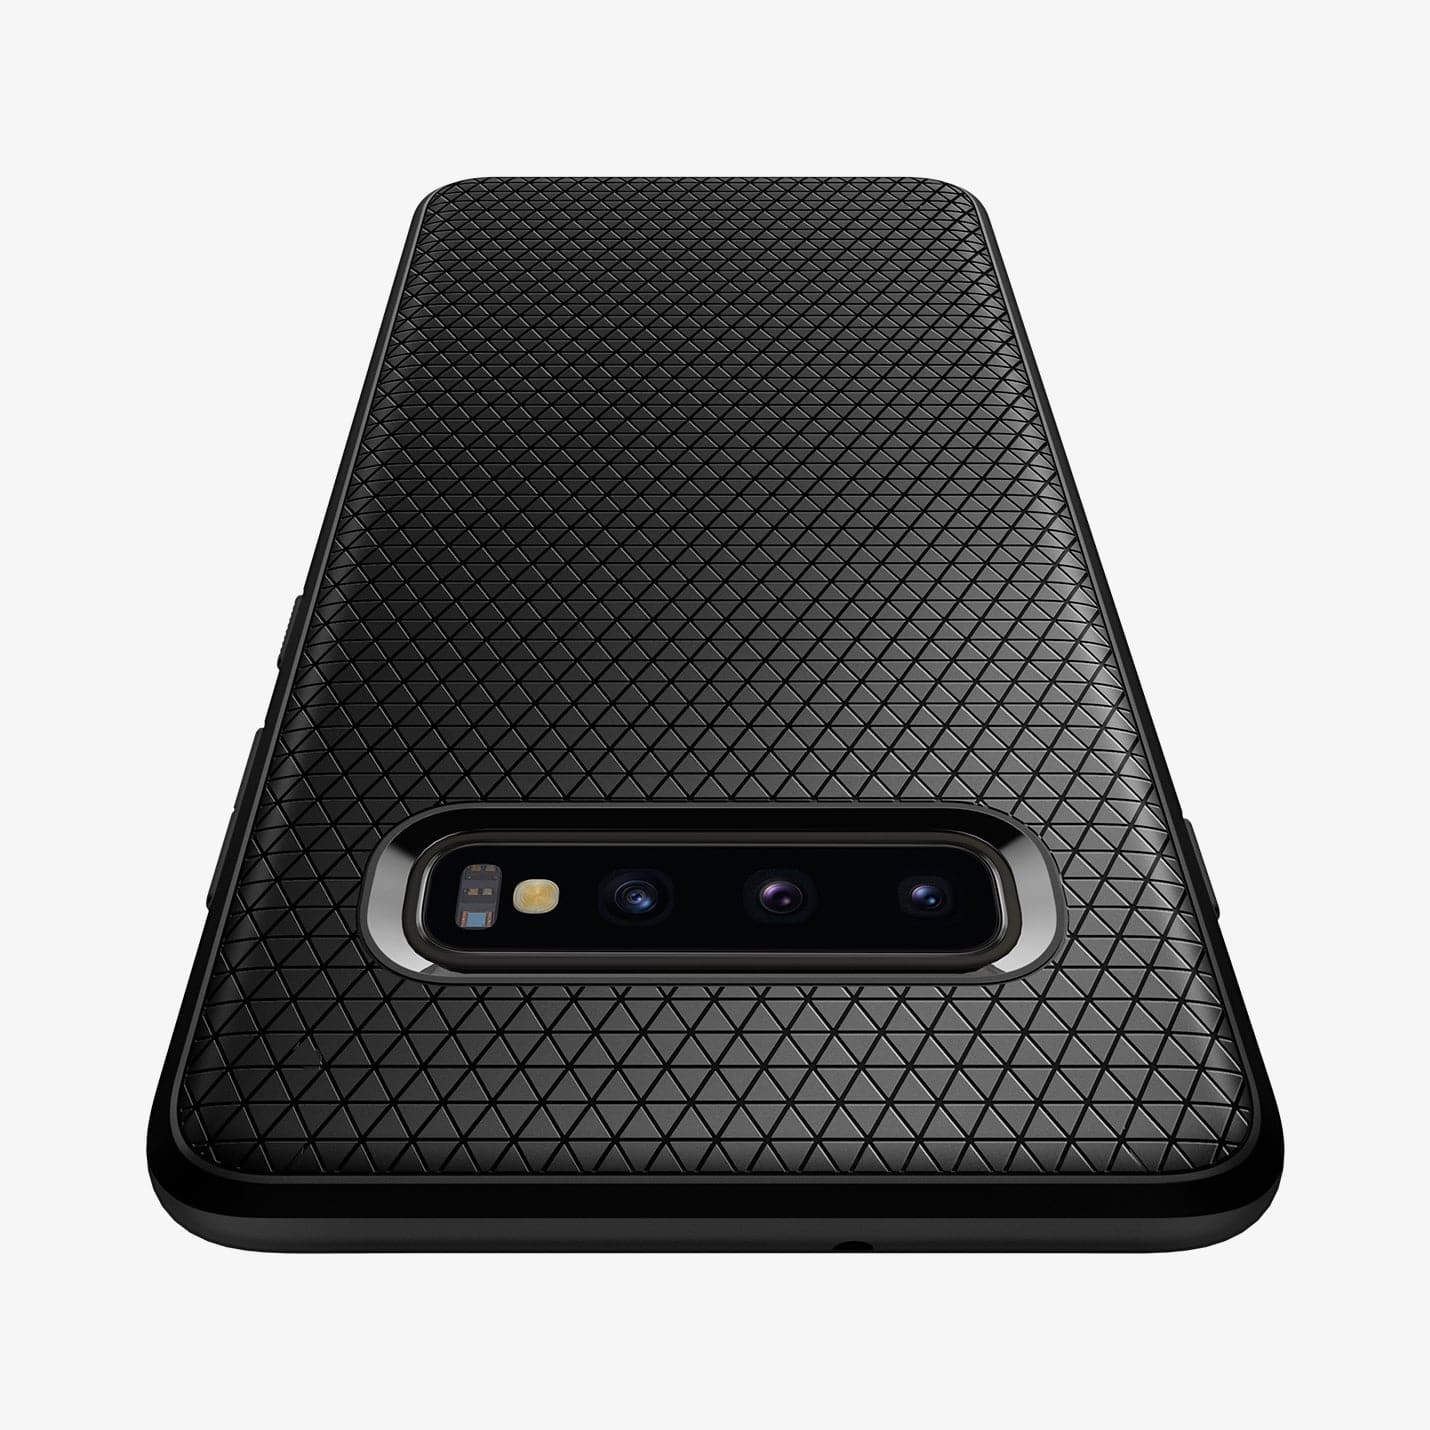 606CS25764 - Galaxy S10 Plus Liquid Air Case in black showing the back and top zoomed in